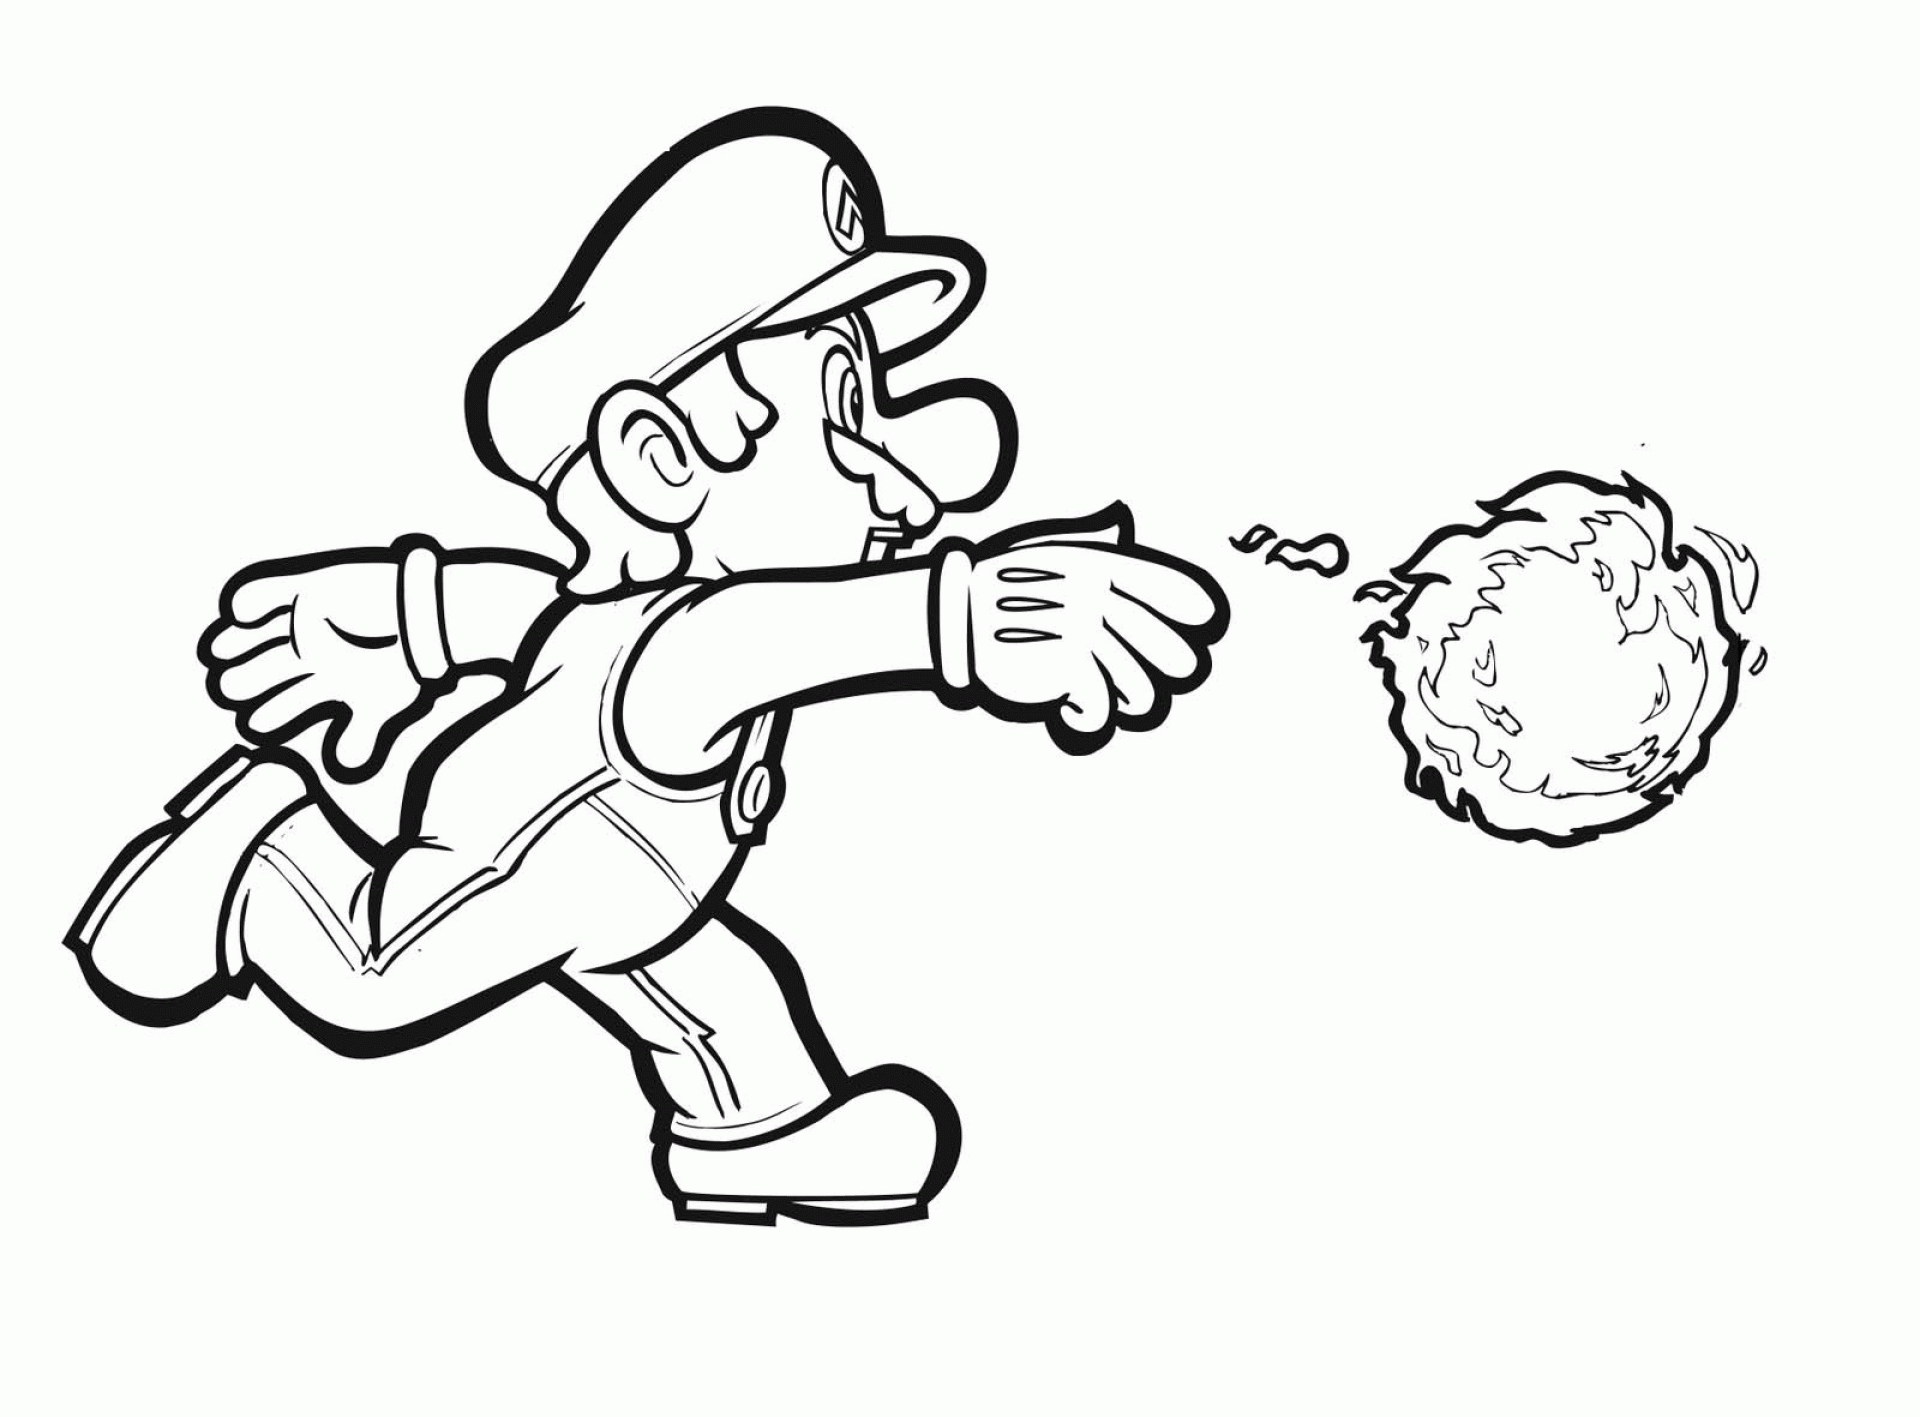 8 Pics of Mario Bros 3 Coloring Pages - Mario Brothers Coloring ...